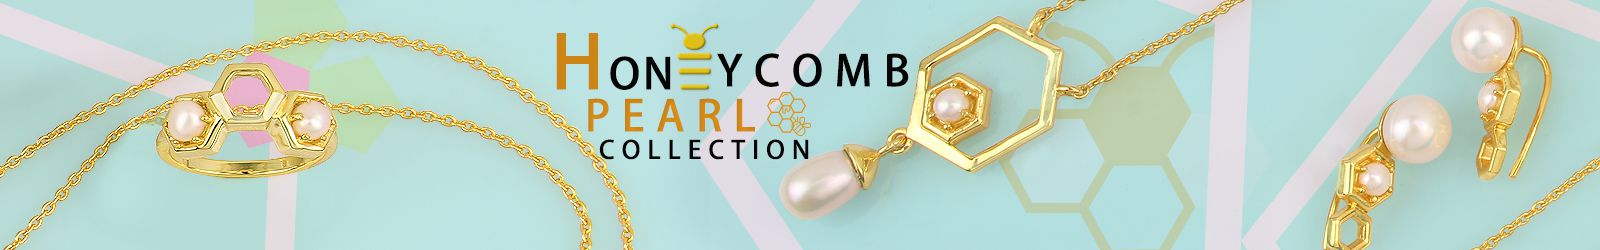 Wholesale Honeycomb pearl jewelry manufacturer